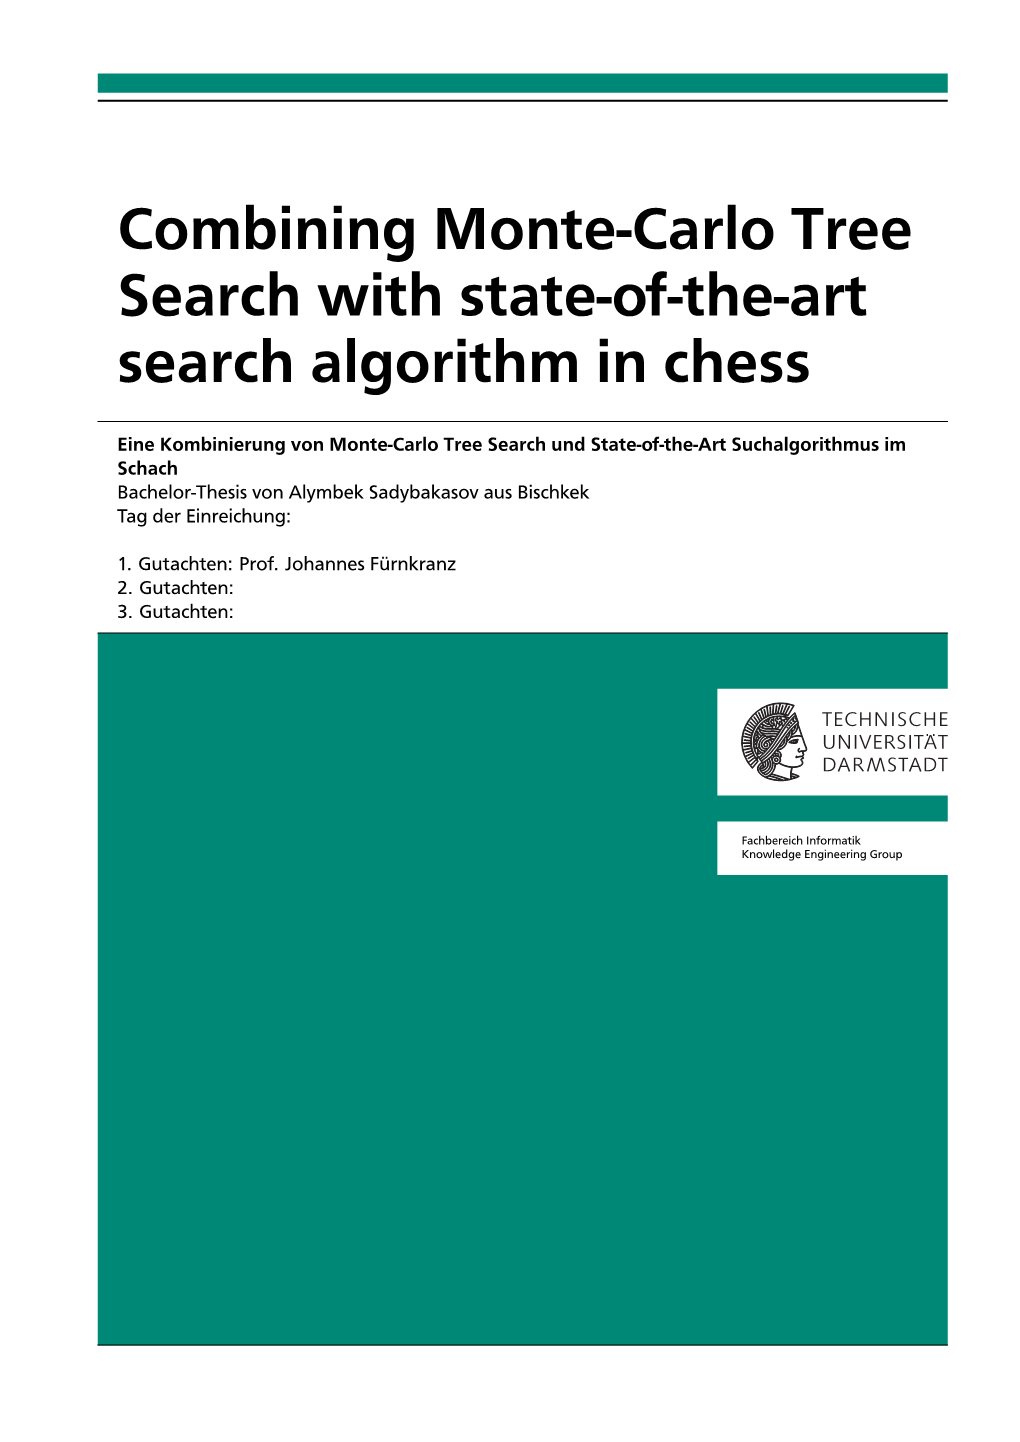 Combining Monte-Carlo Tree Search with State-Of-The-Art Search Algorithm in Chess